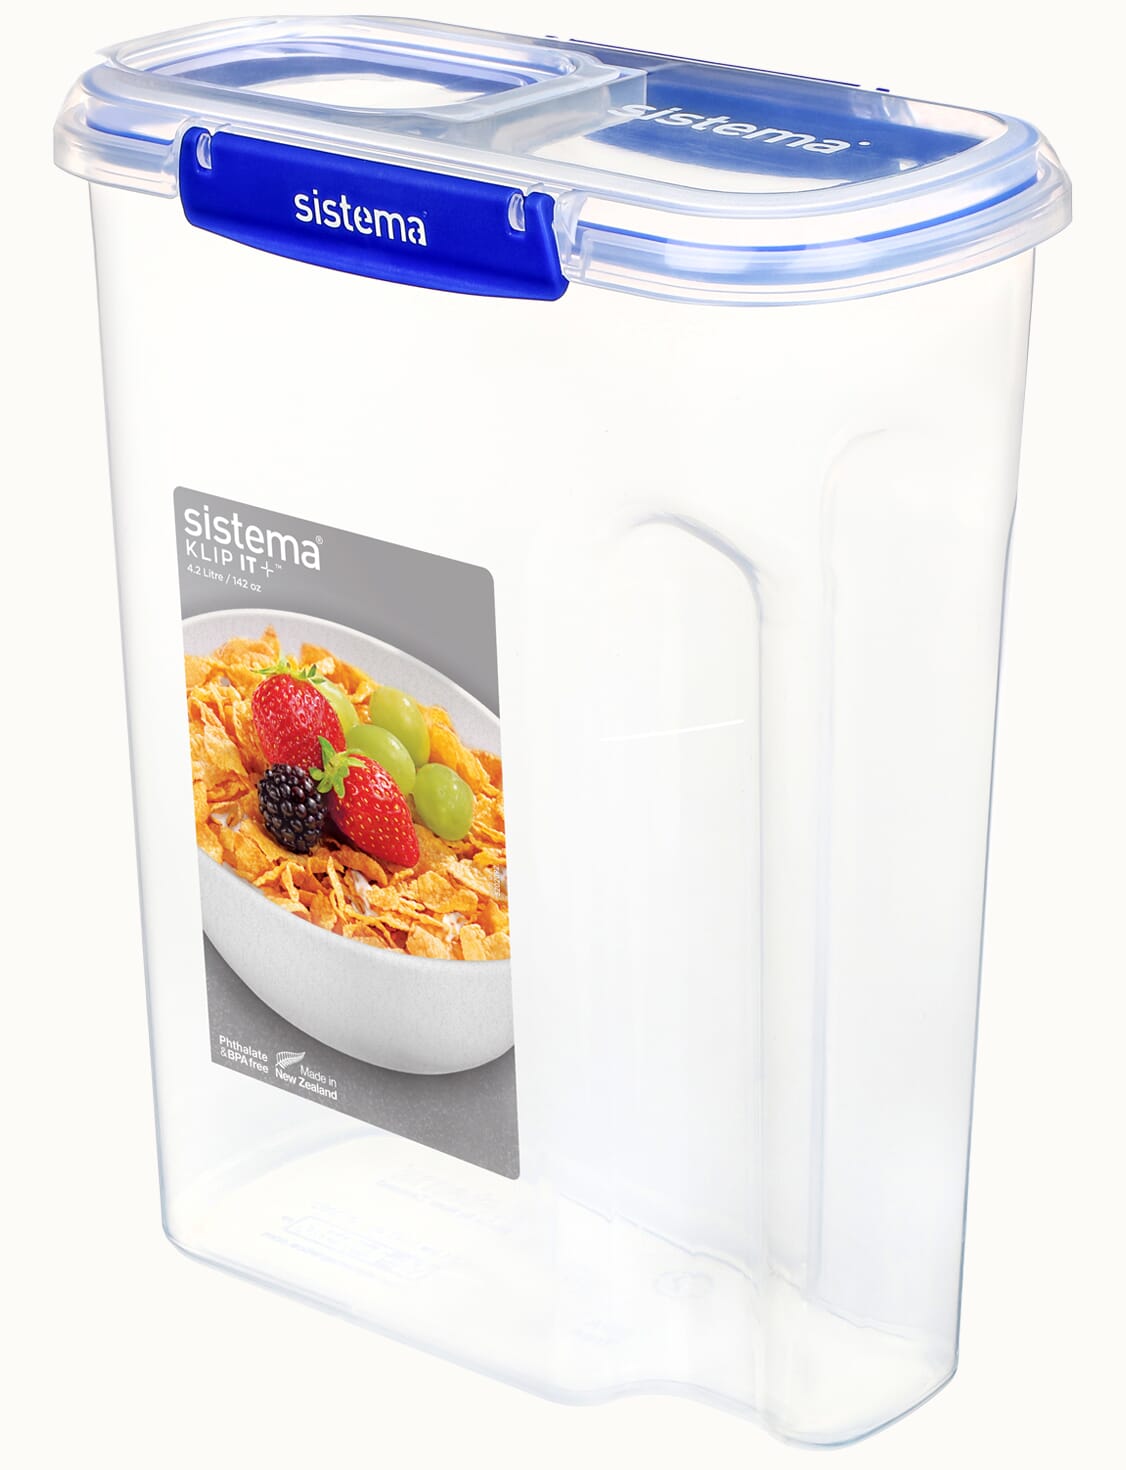 Sistema Klip It Cereal Container 142 Oz Clear Blue ( 4 Pack )